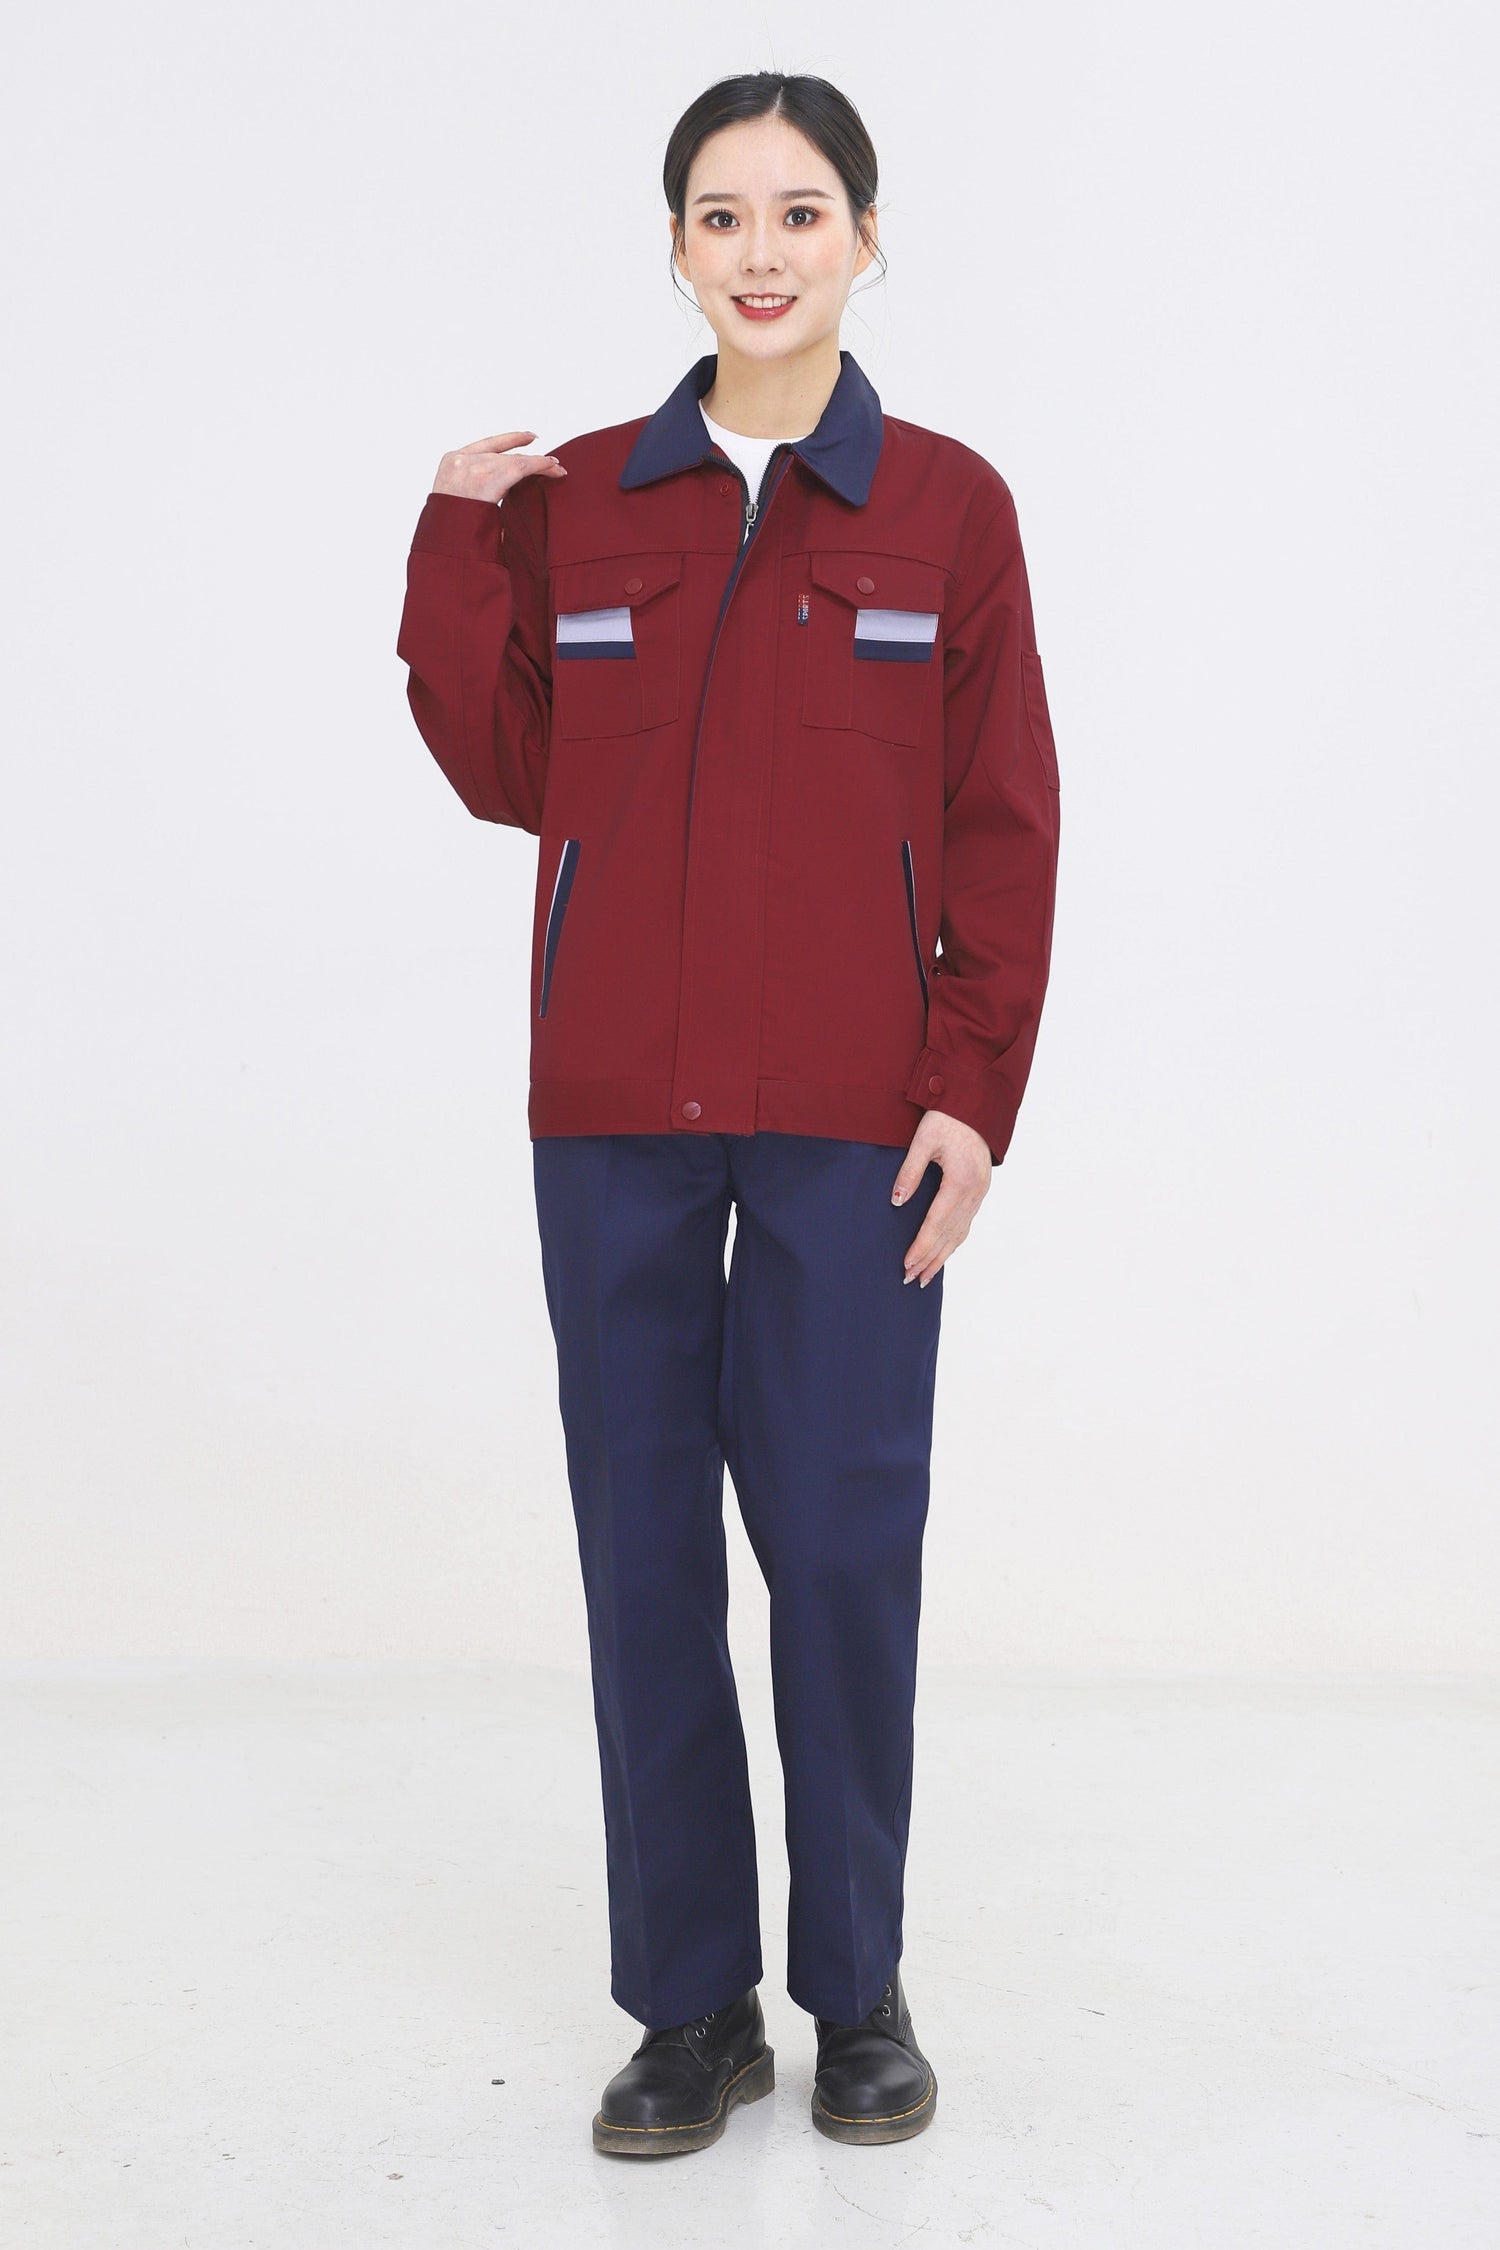 Corals Trading Co. 可樂思百貨商行 涤棉 Spring and Autumn Long Sleeve Polyester-Cotton Workwear SD-W407